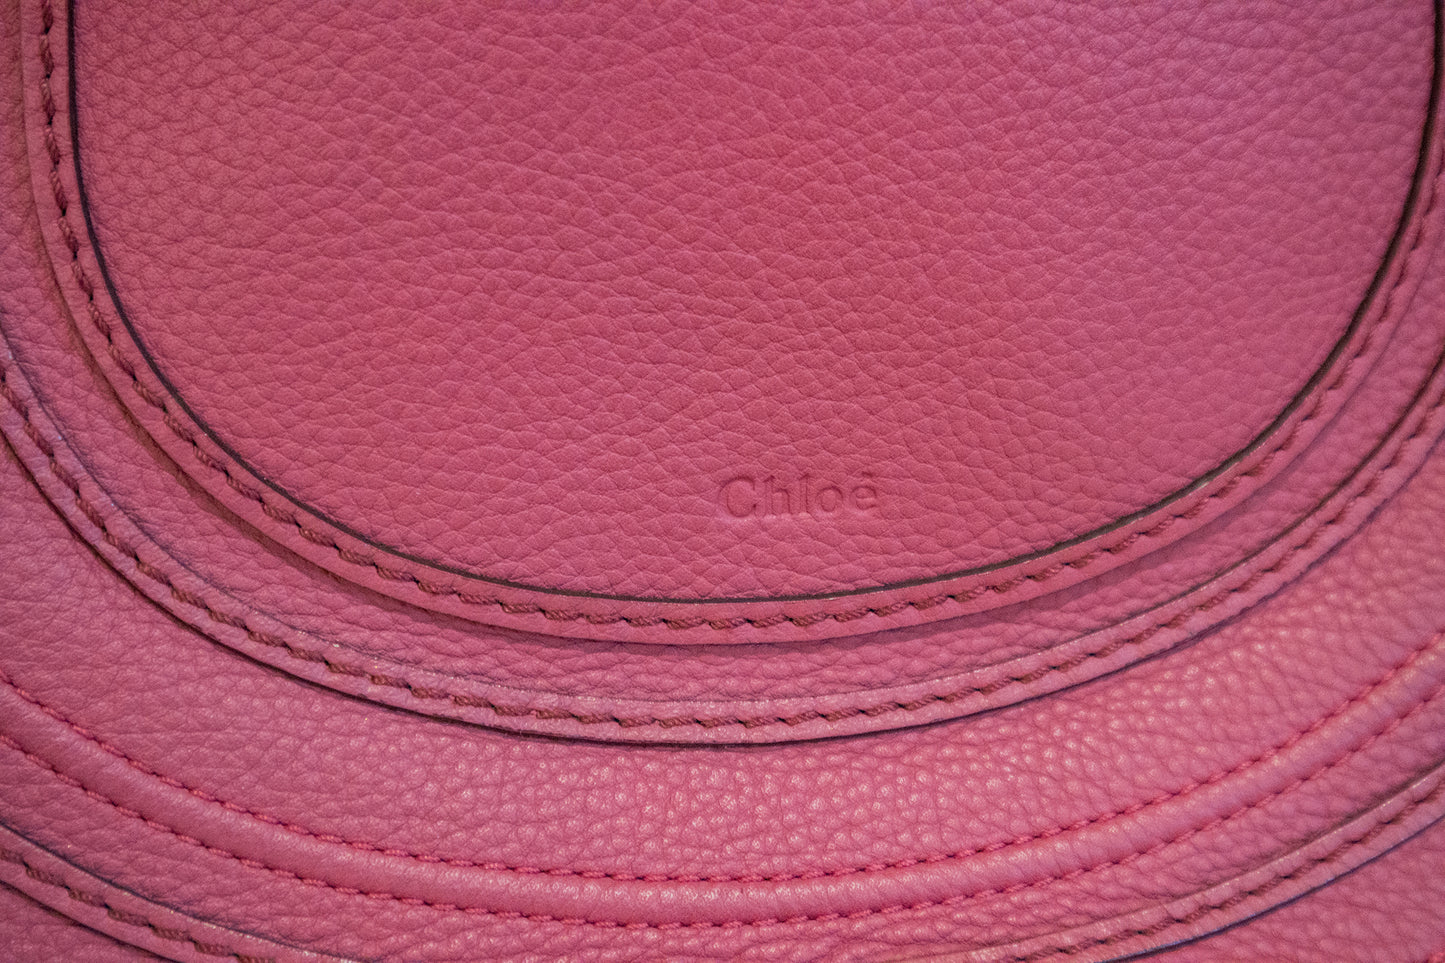 Chloé - Marcie Small in Rusty Pink